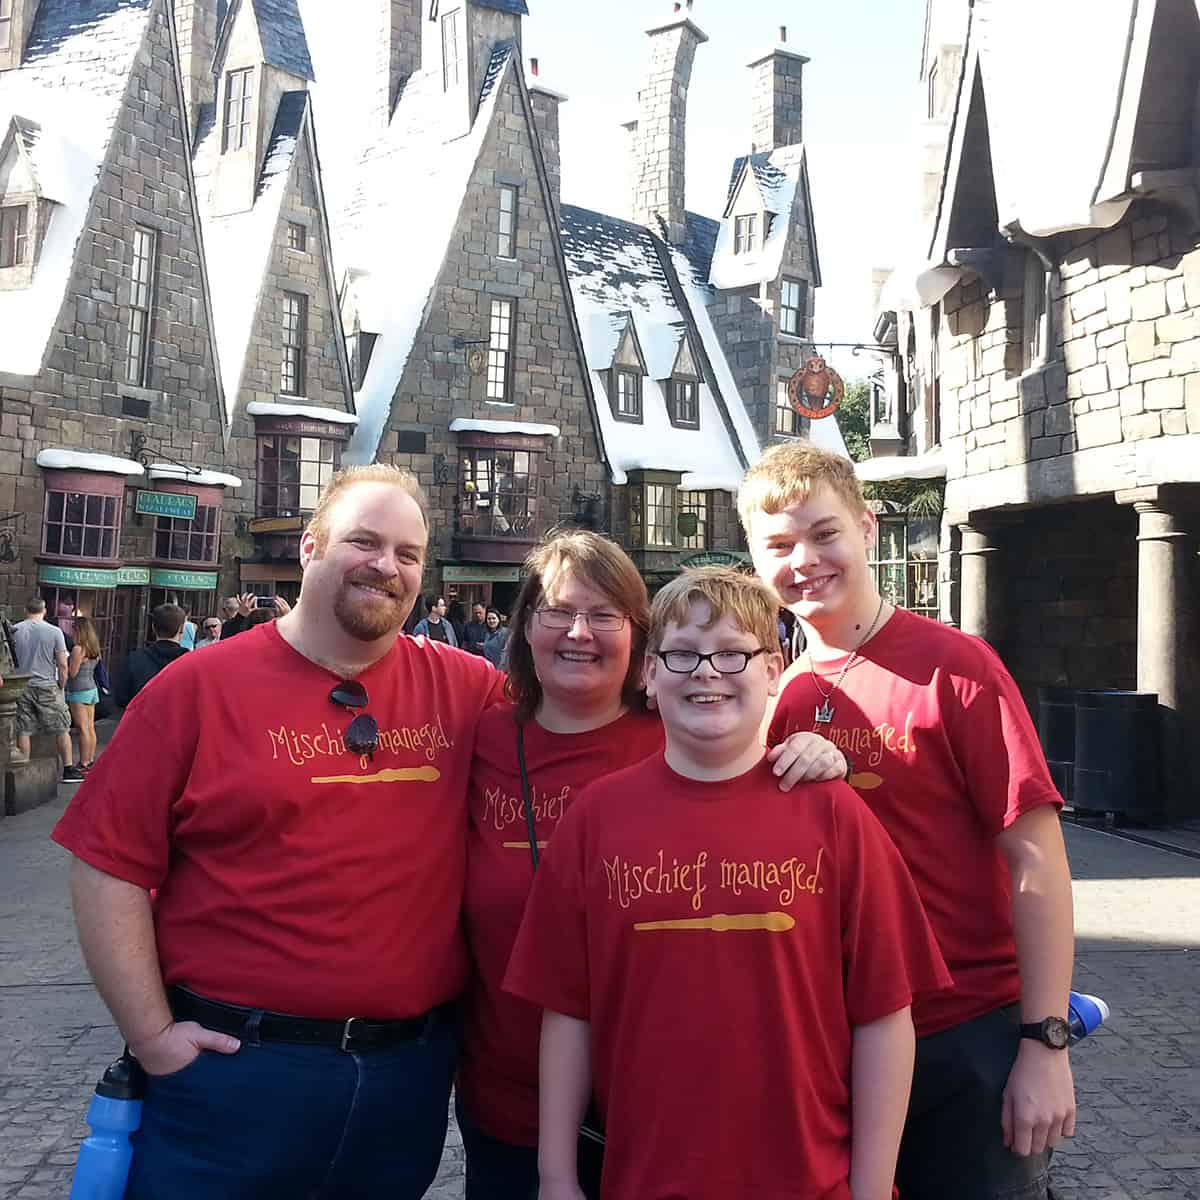 My family in Hogsmeade at The Wizarding World of Harry Potter in Florida.